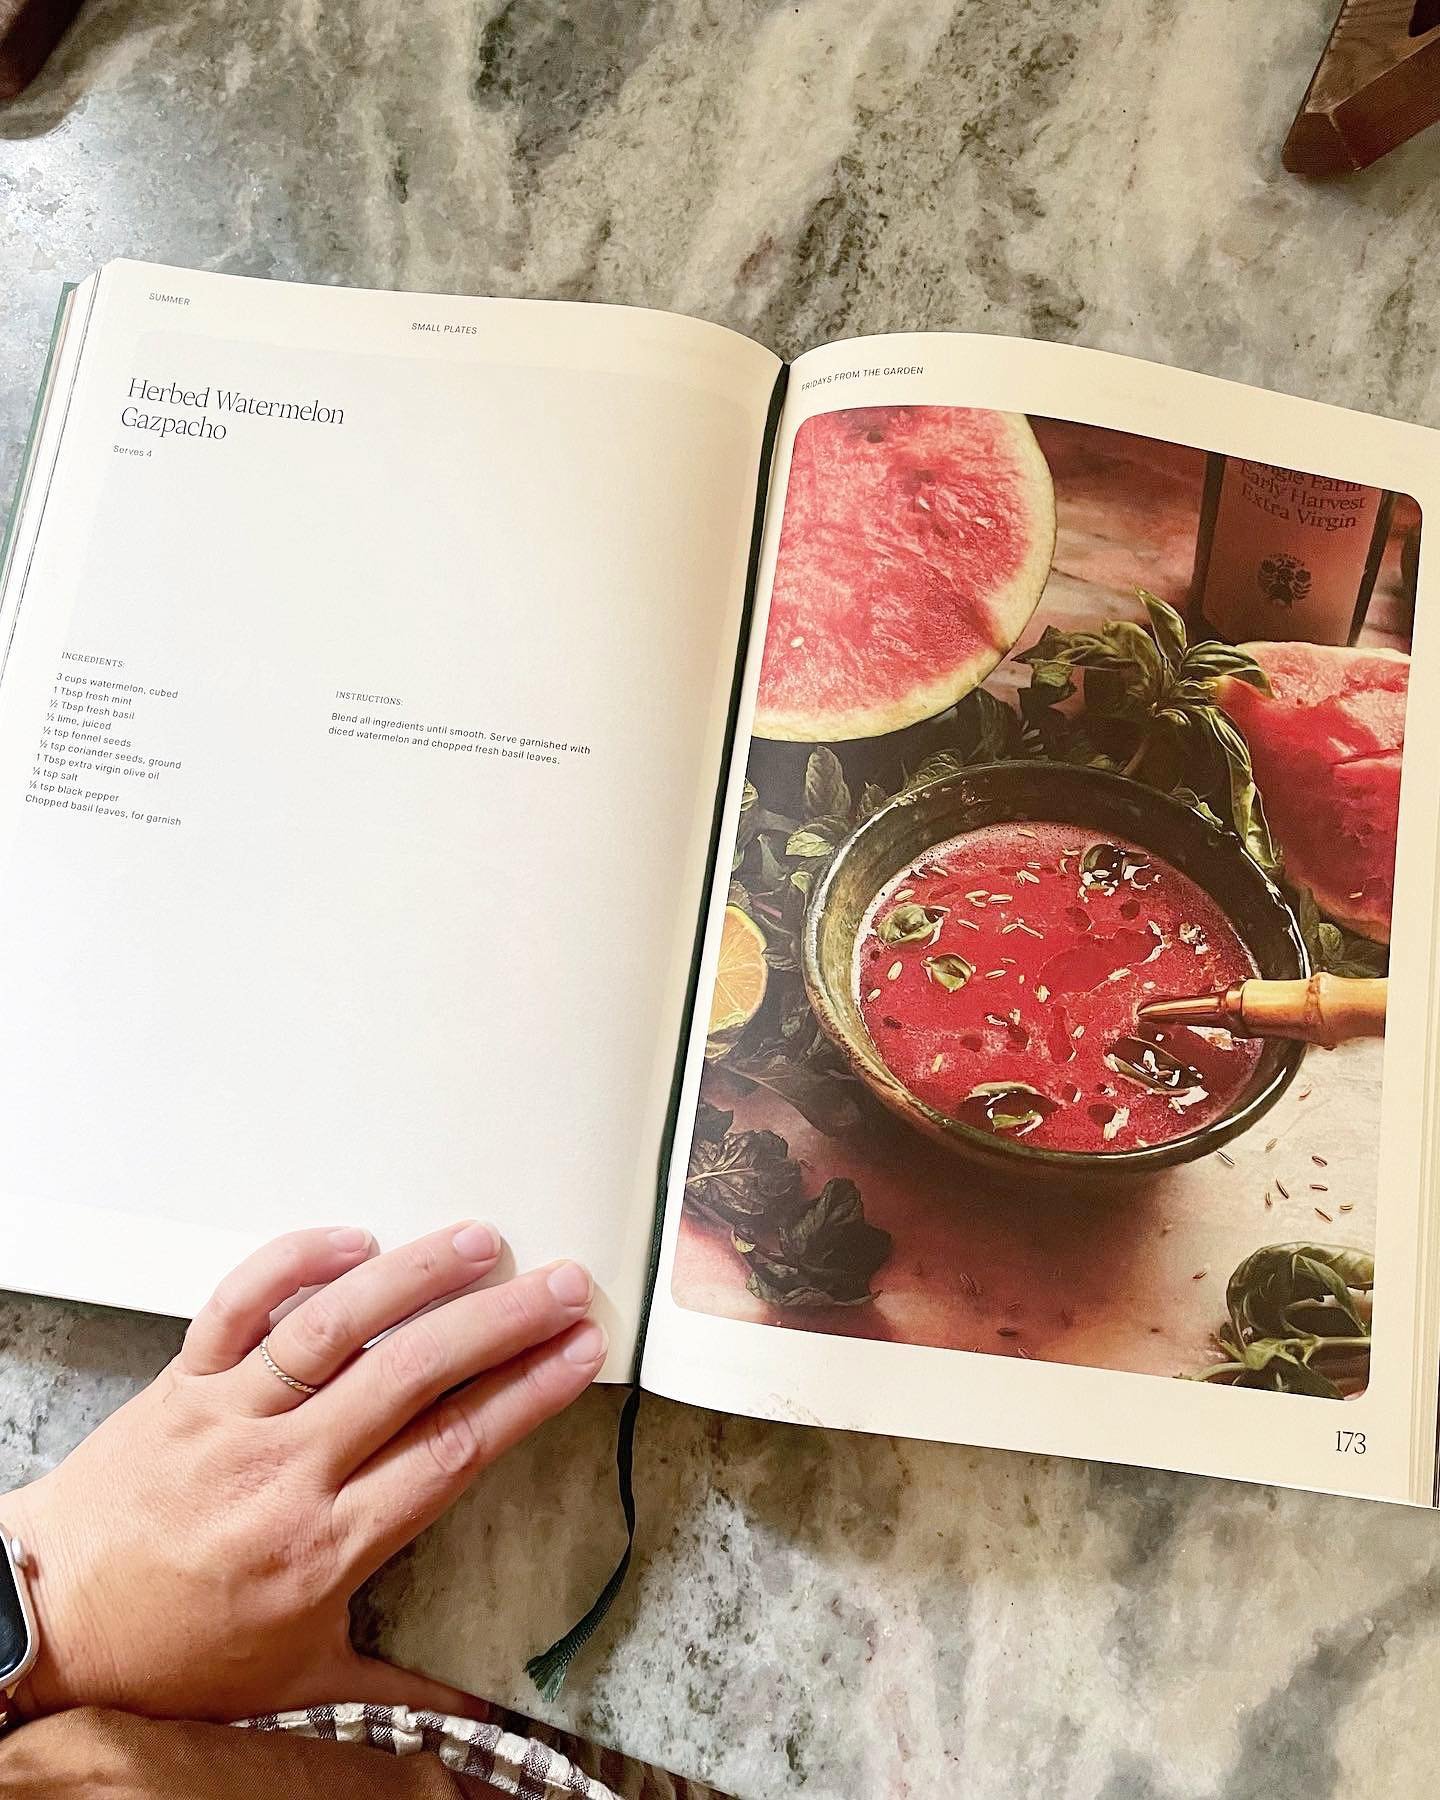 This Herbed Watermelon Gazpacho from the @flamingo_estate cookbook stocked at both rentals has me all 🤩🤤 My last three guests took one home with them before they left- the beauty of a shoppable rental 🛍️

Currently available to purchase through th